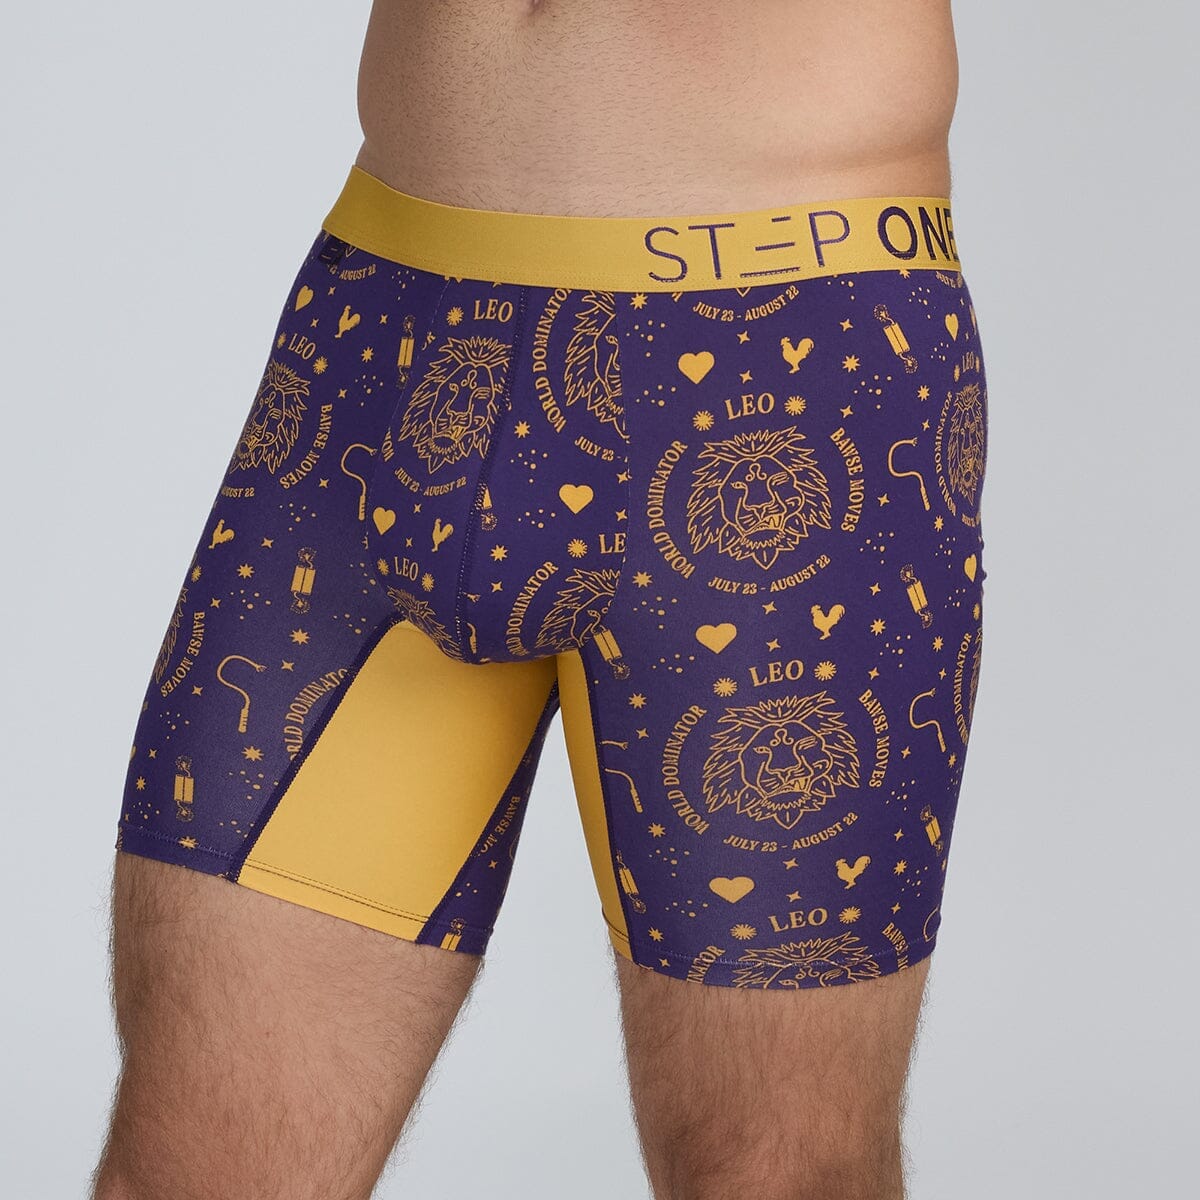 Bamboo Star Sign Underwear at Step One